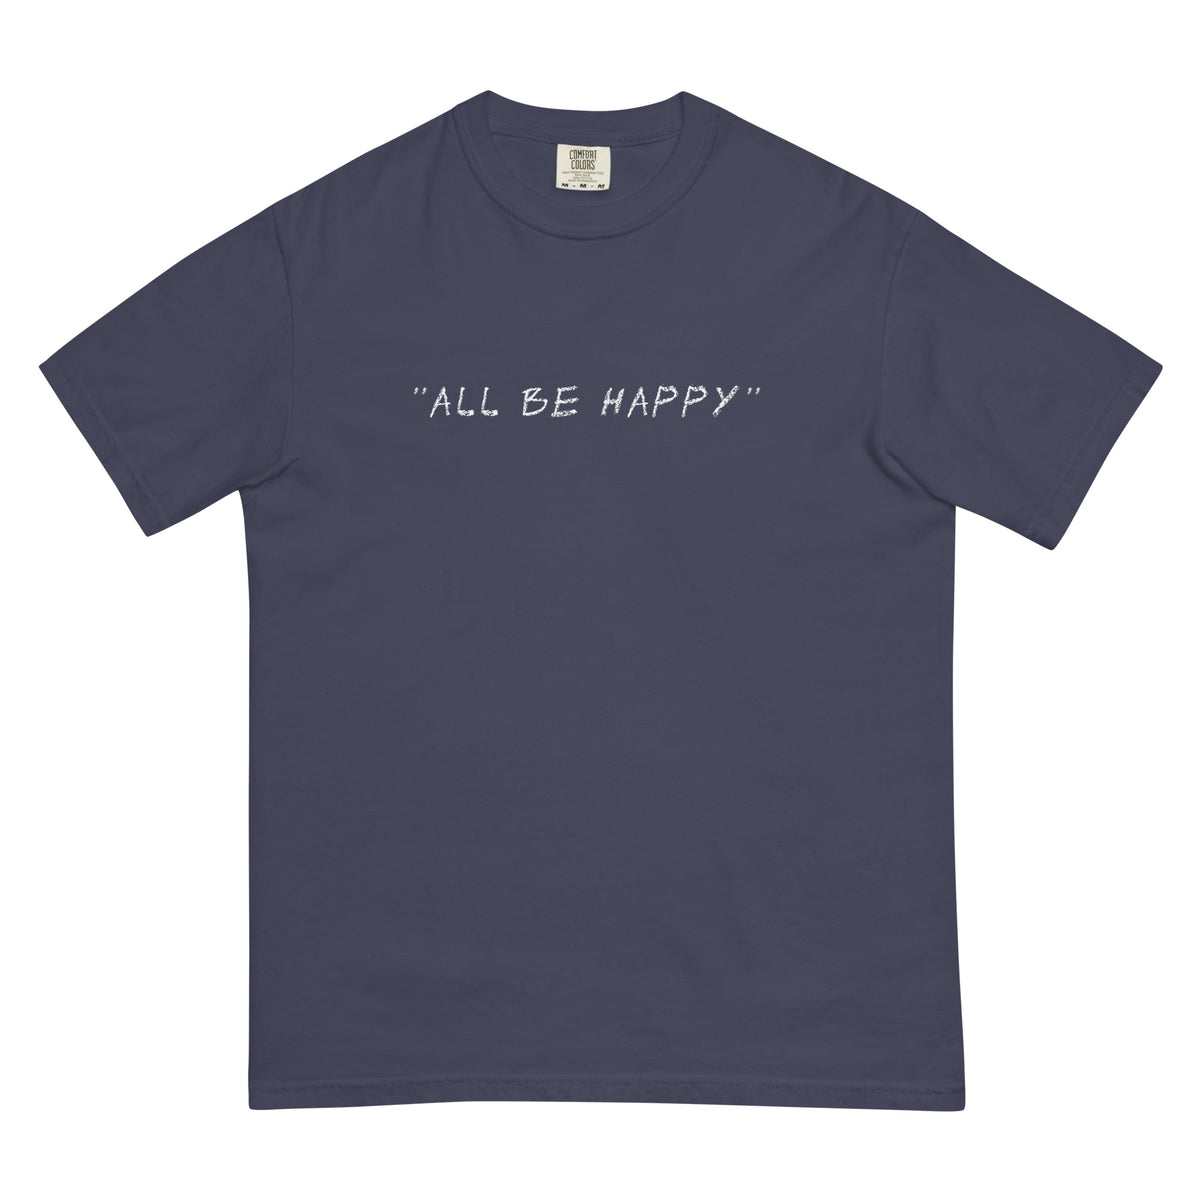 All Be Happy Heritage Garment-Dyed Tee